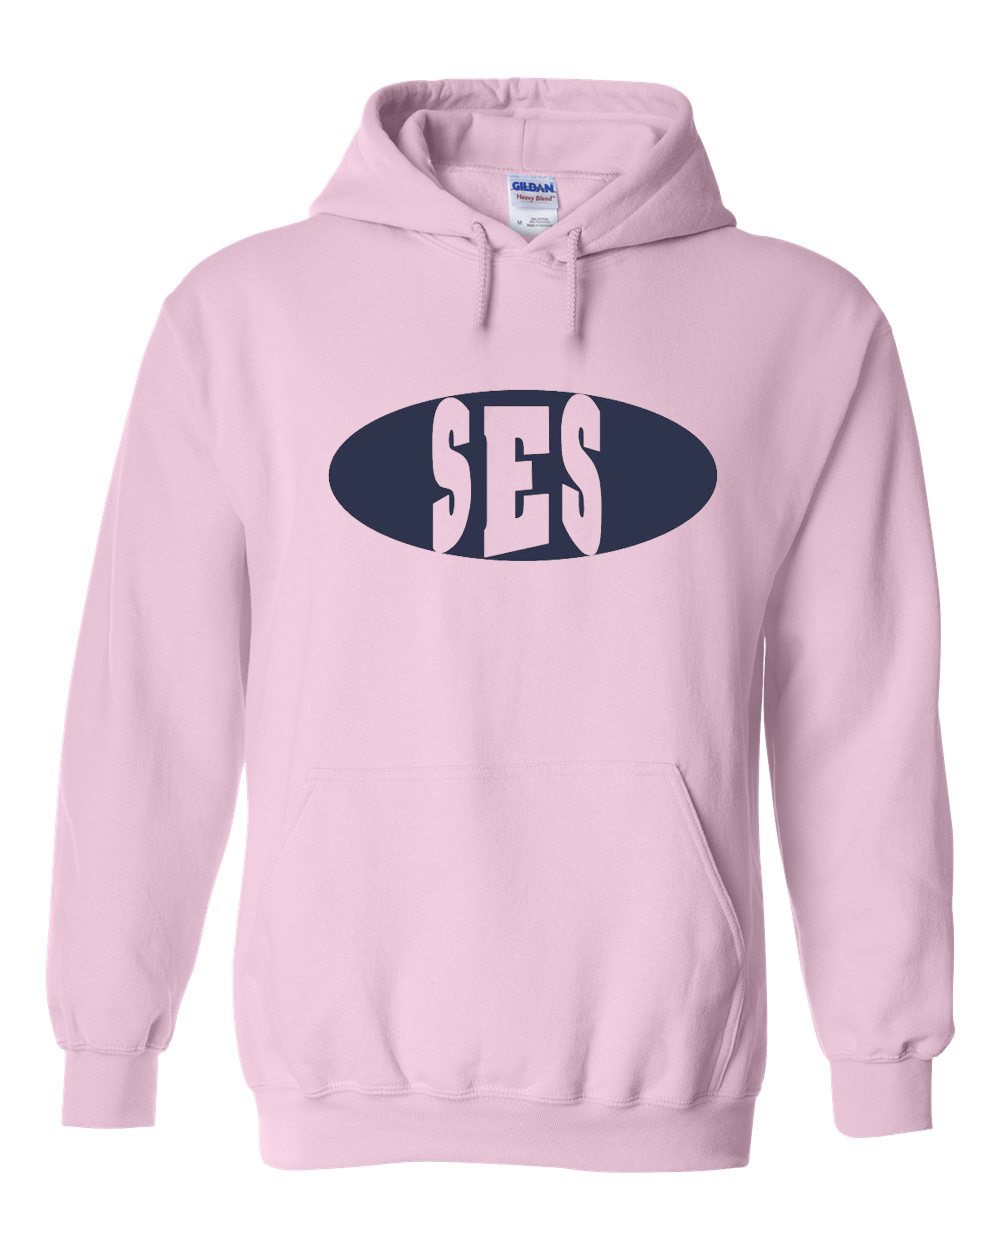 SES Spirit Pullover Hoodie w/ Navy Logo - Please Allow 2-3 Weeks for Delivery